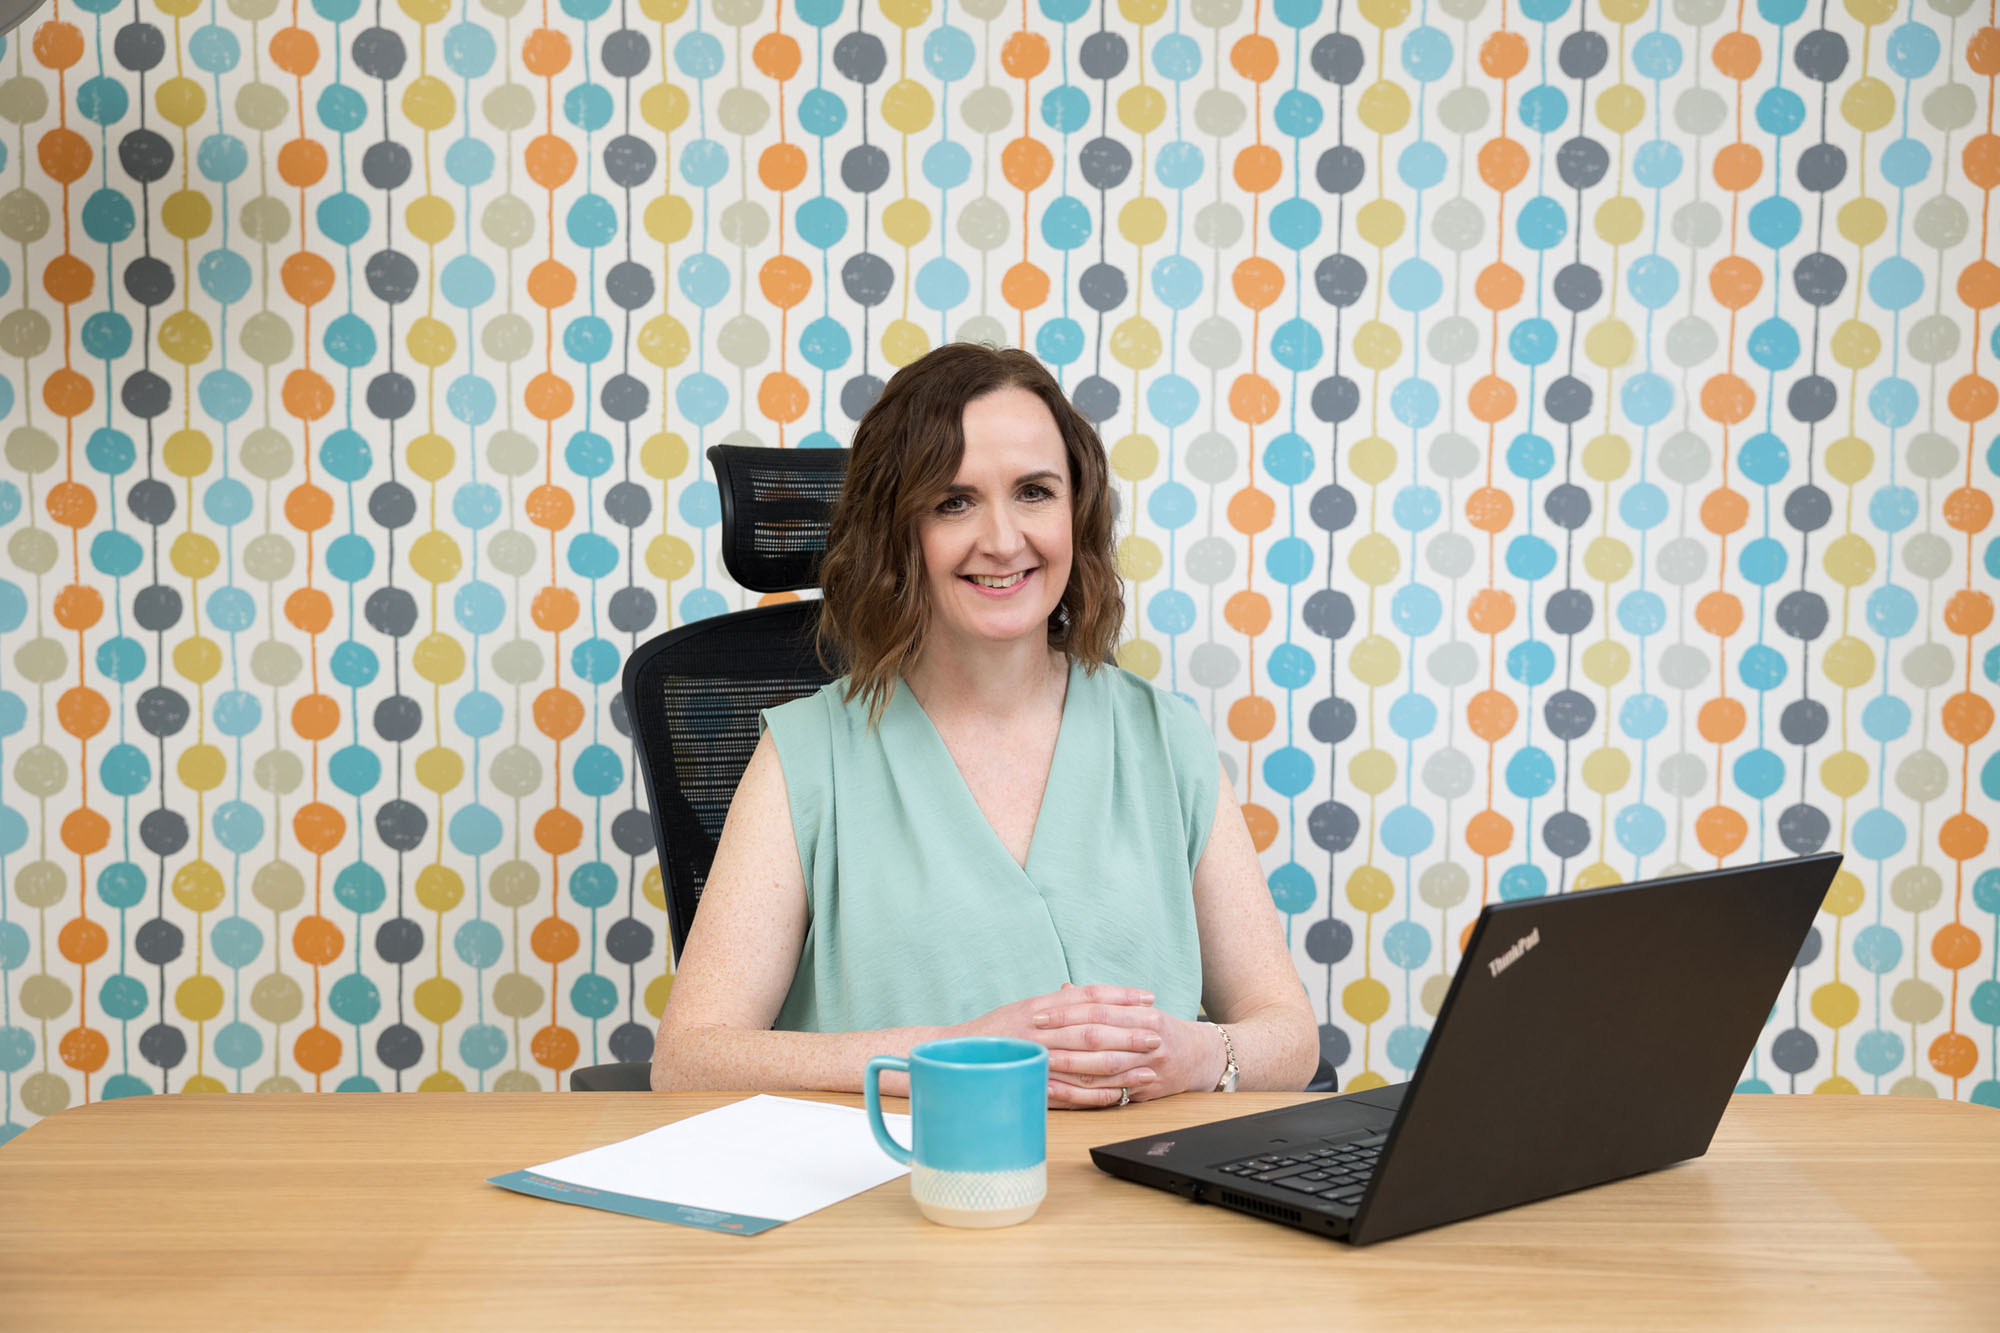 A woman at her desk in front of a spotty wall during her Croydon personal branding photography shoot